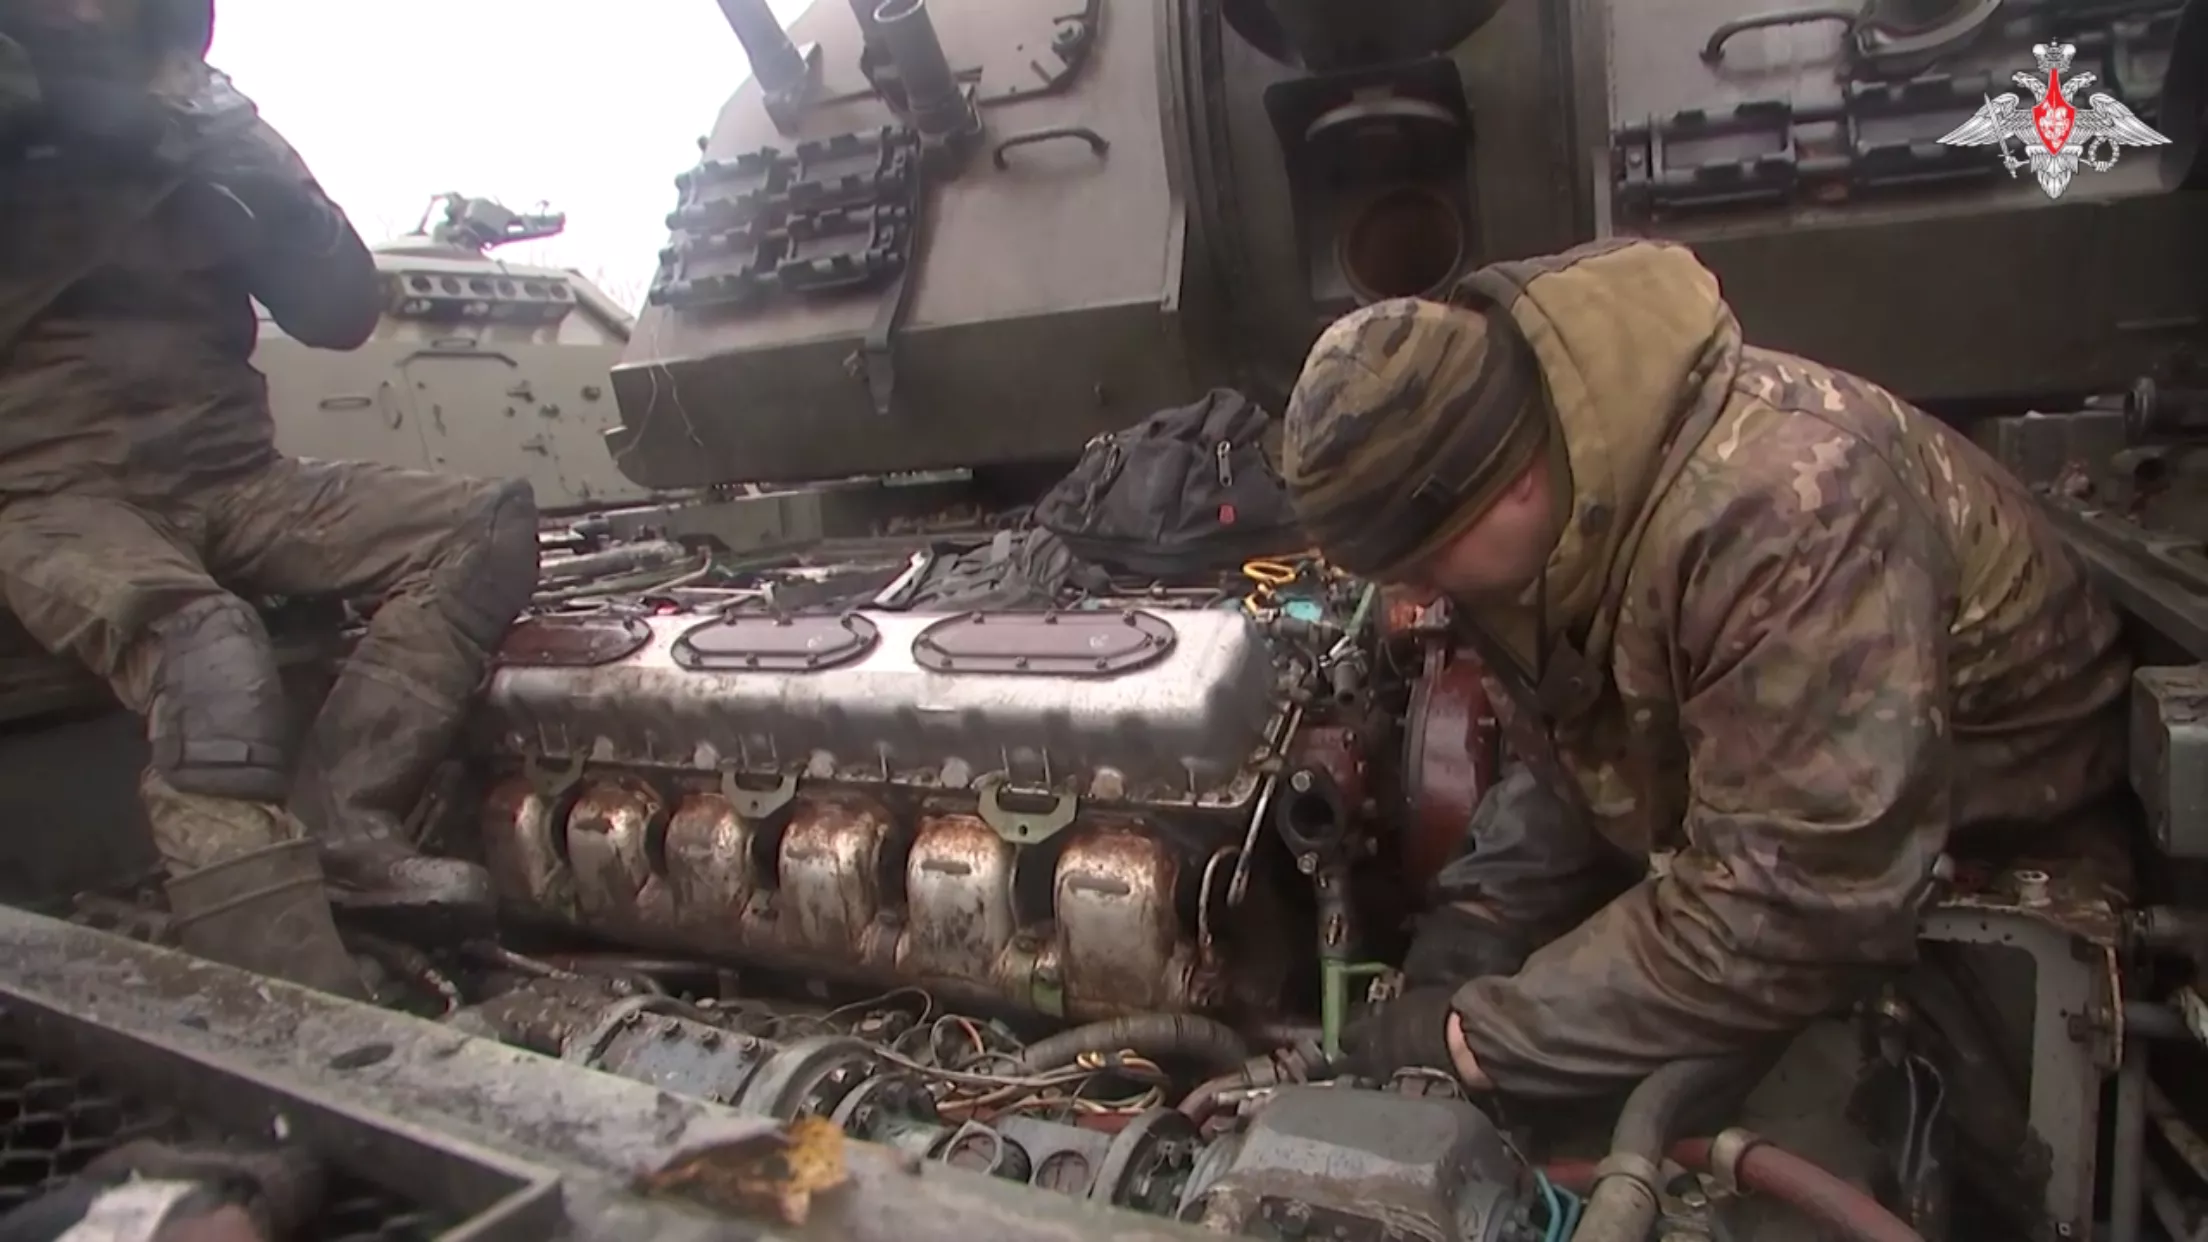 Russian troops repair an armored vehicle.